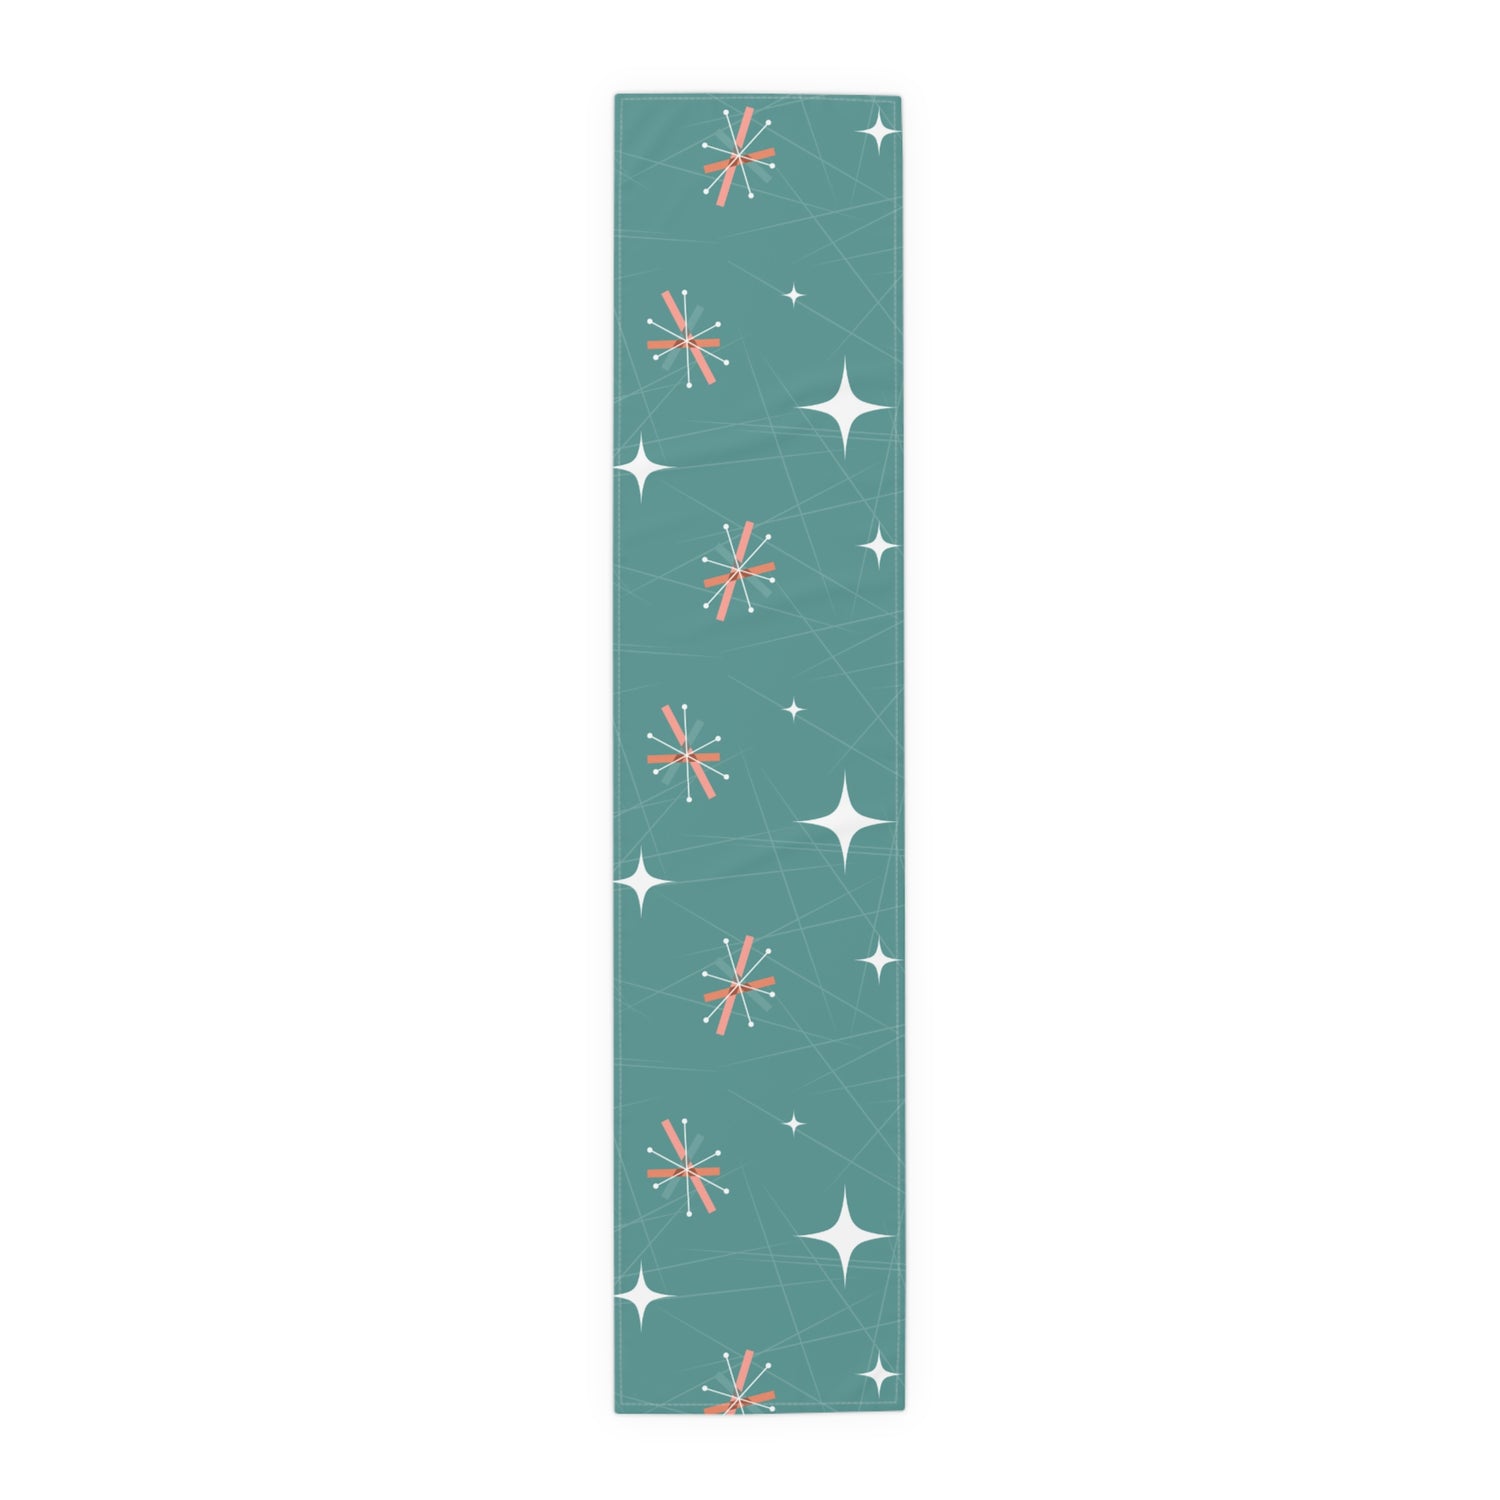 Mid Century Modern, Kitchen, Dining, Table Runner, Teal Blue, Pink, Abstract Starburst MCM Designs